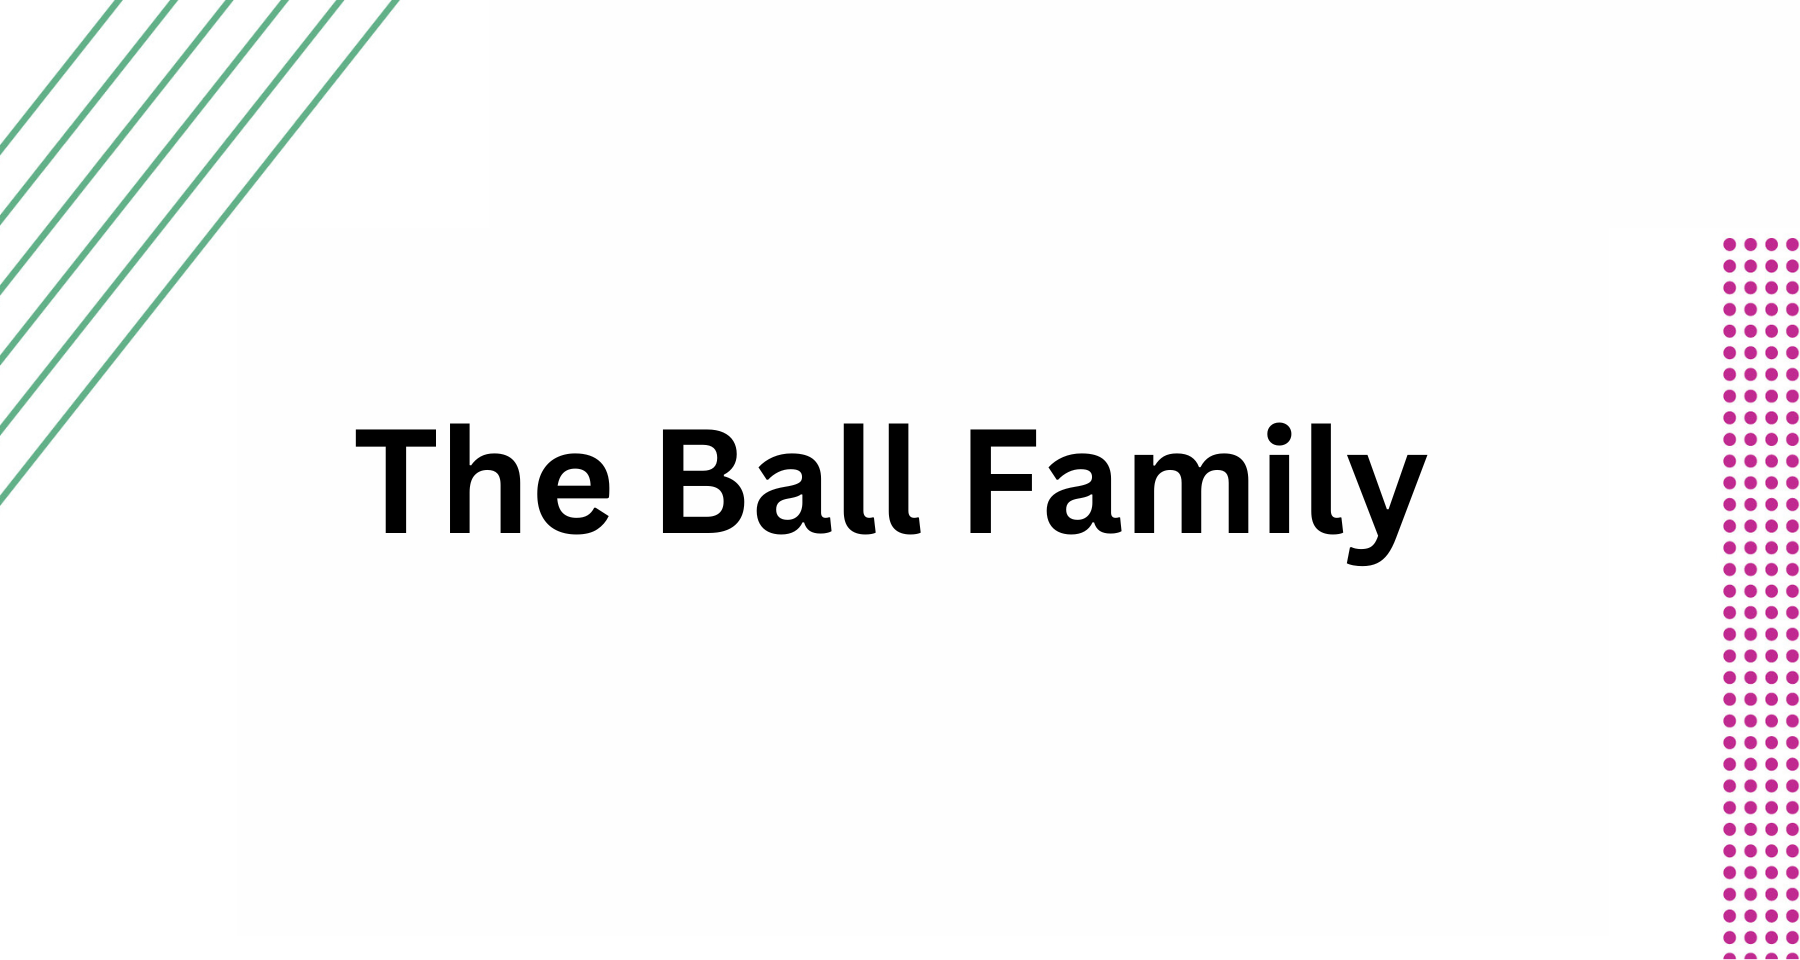 The Ball Family